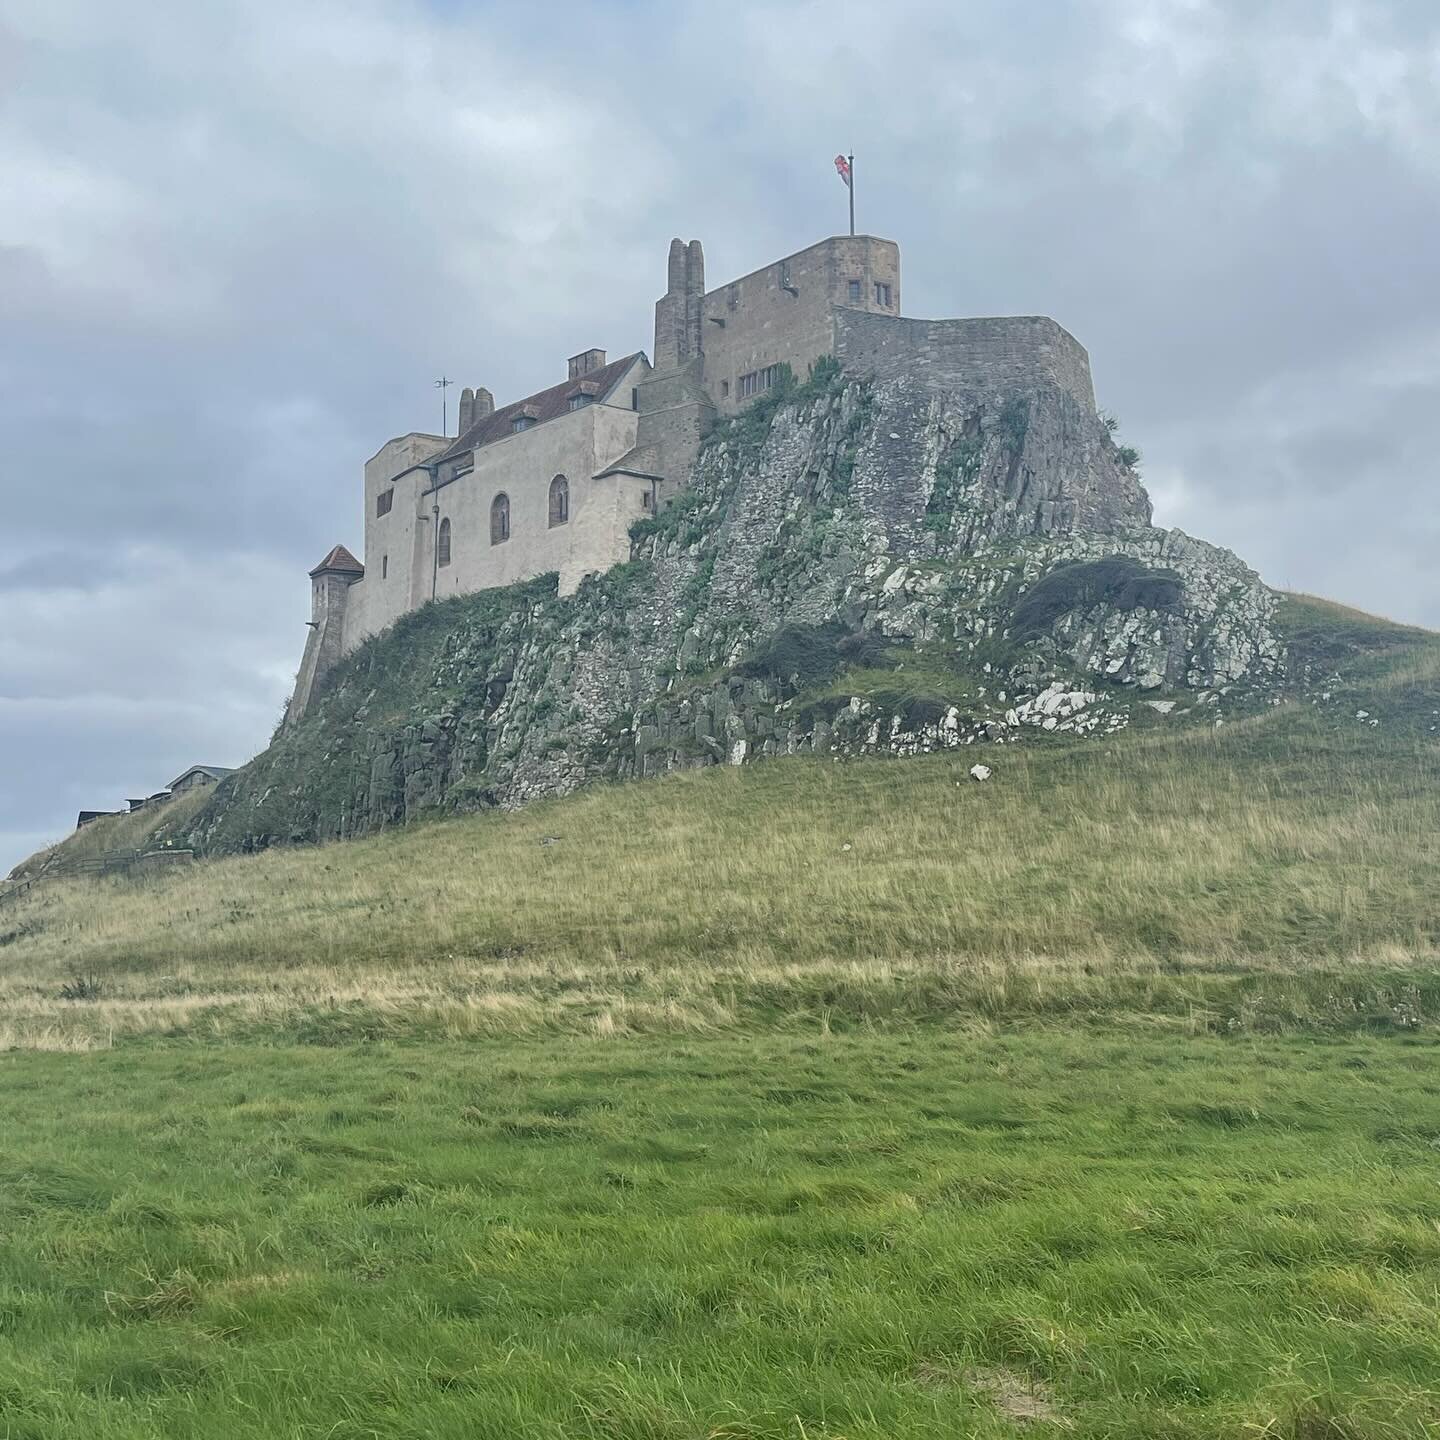 No style here&hellip; just beauty&hellip;. Historic Lindisfarne Castle renovated by Edwin Lutyens with gardens by Gertrude Jekyll. Picture taken today on tour with @lutyens_trust_america 
.
.
.
#architecturaldelight #edwinlutyens #castle #lindisfarne